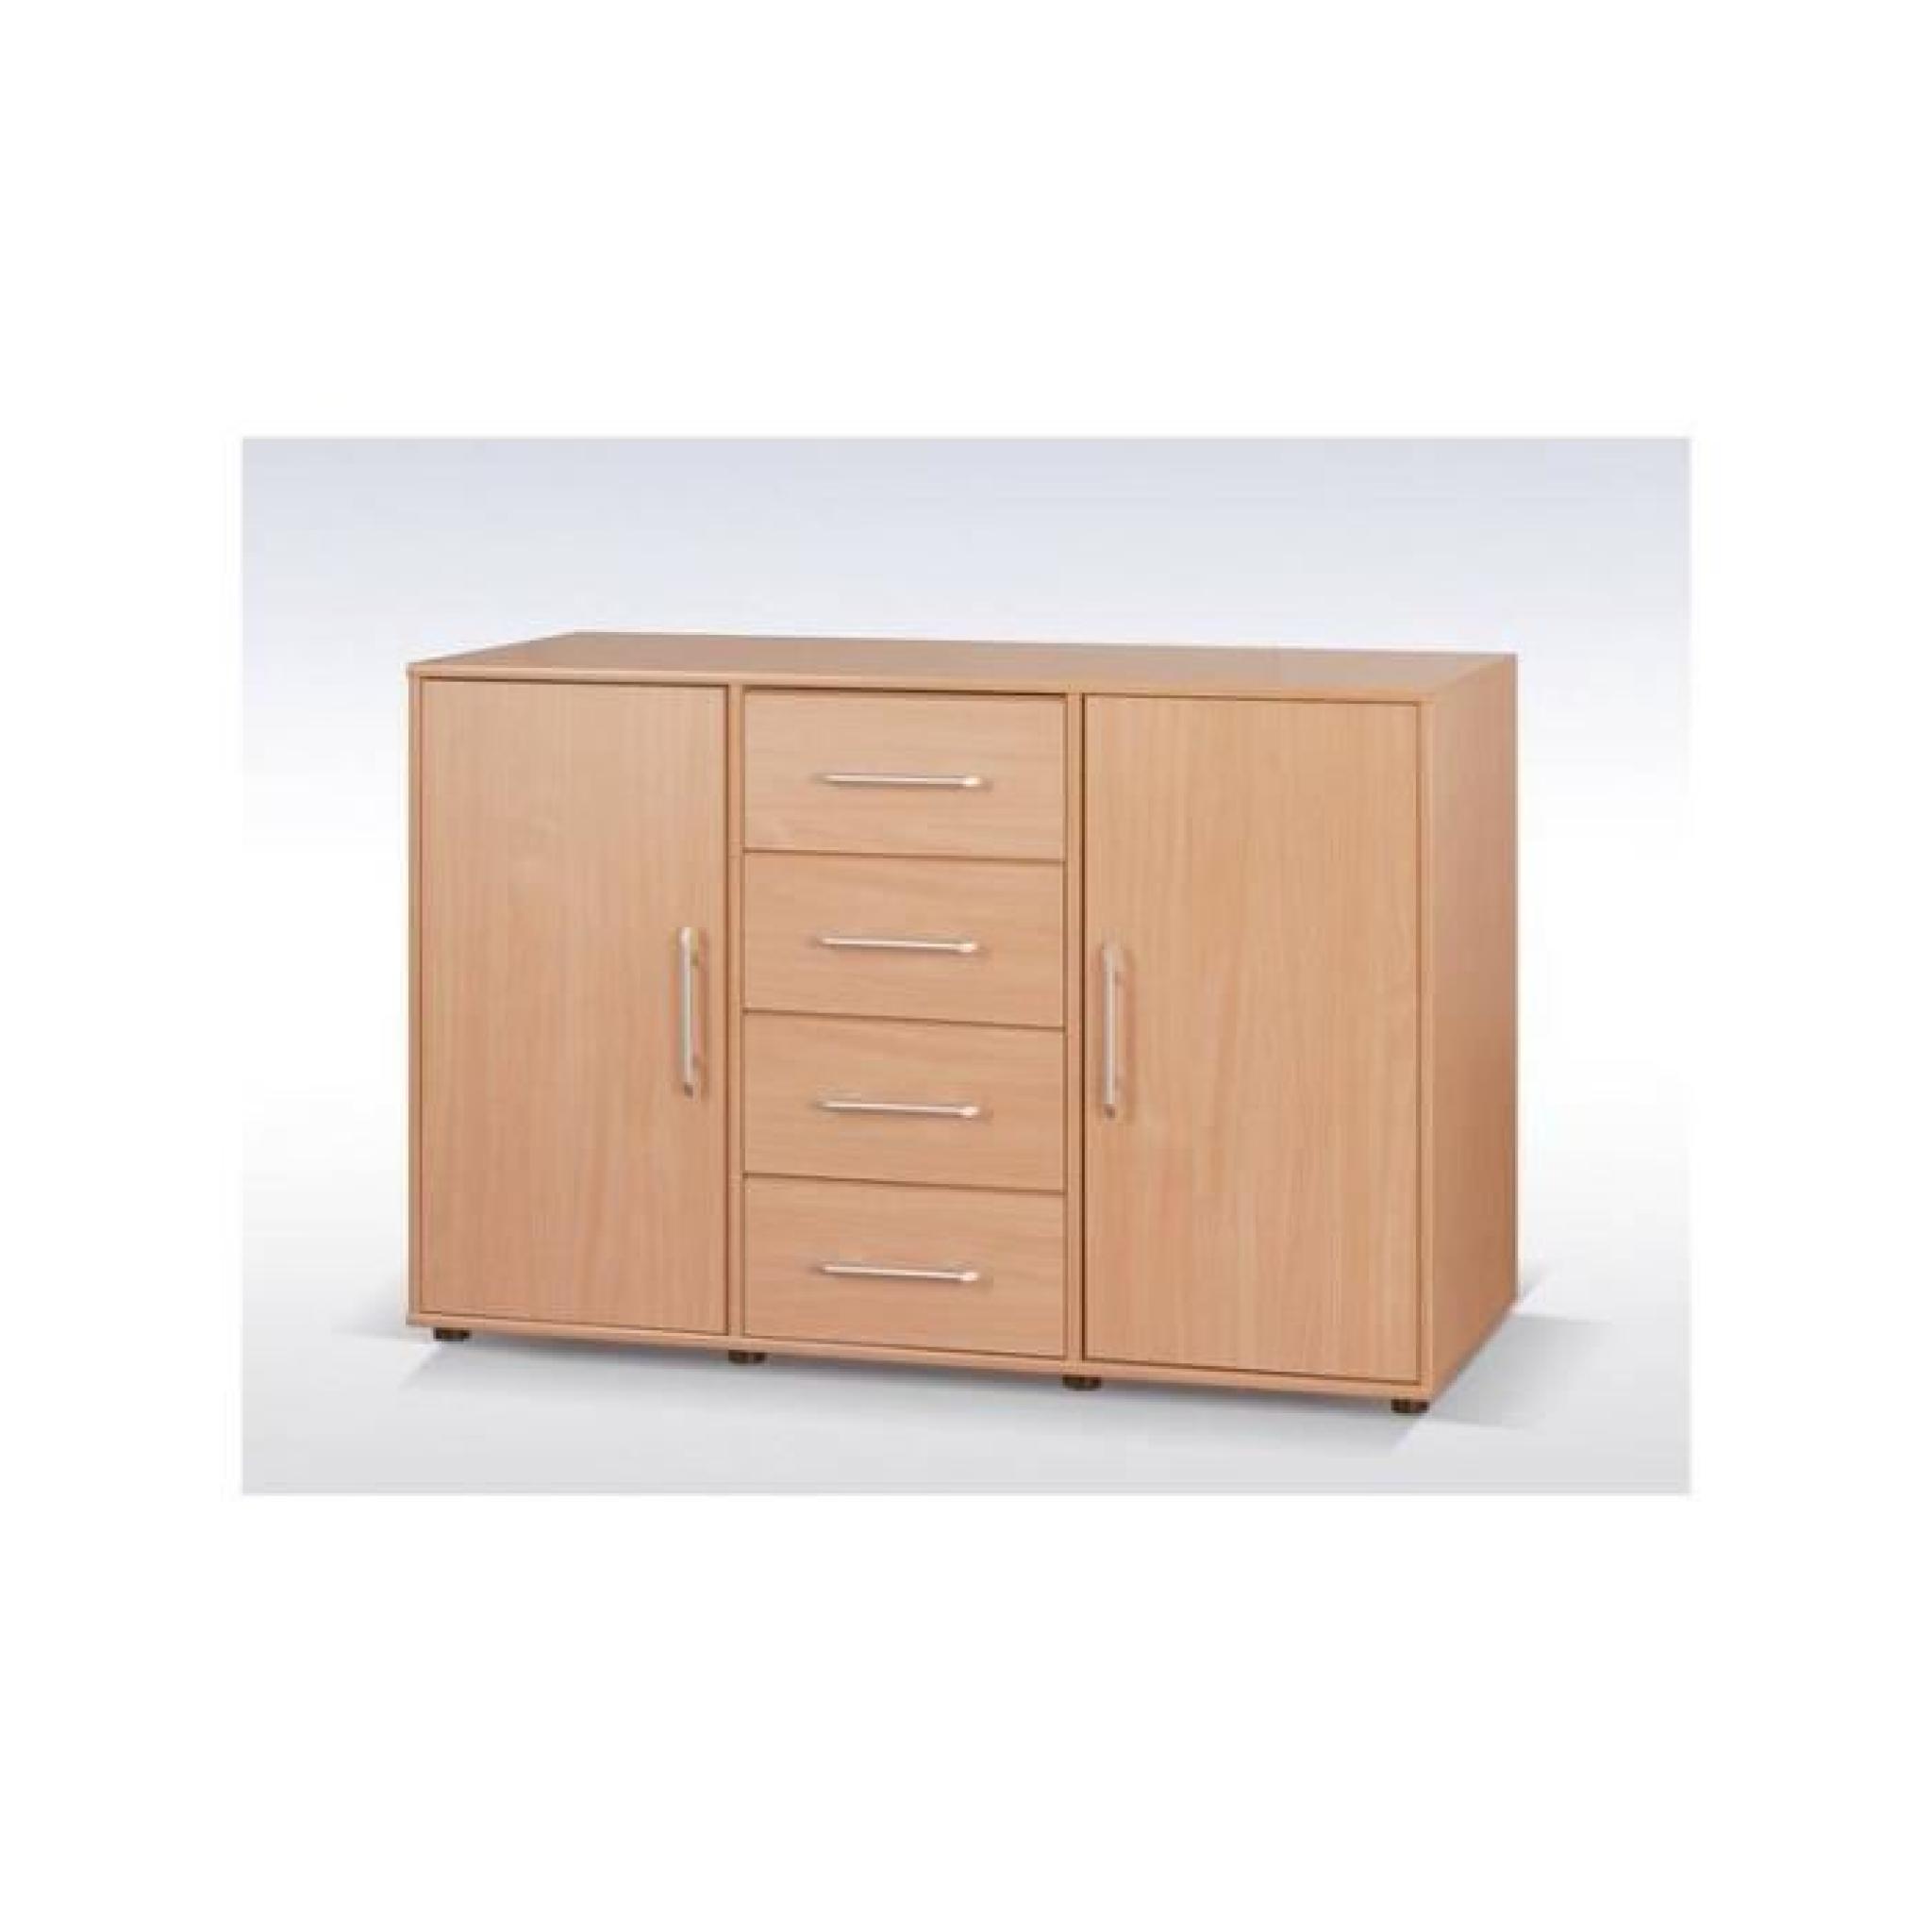 JUSThome Maxion MX XVII Commode Buffet Hêtre 88 x 135 x 51 cm